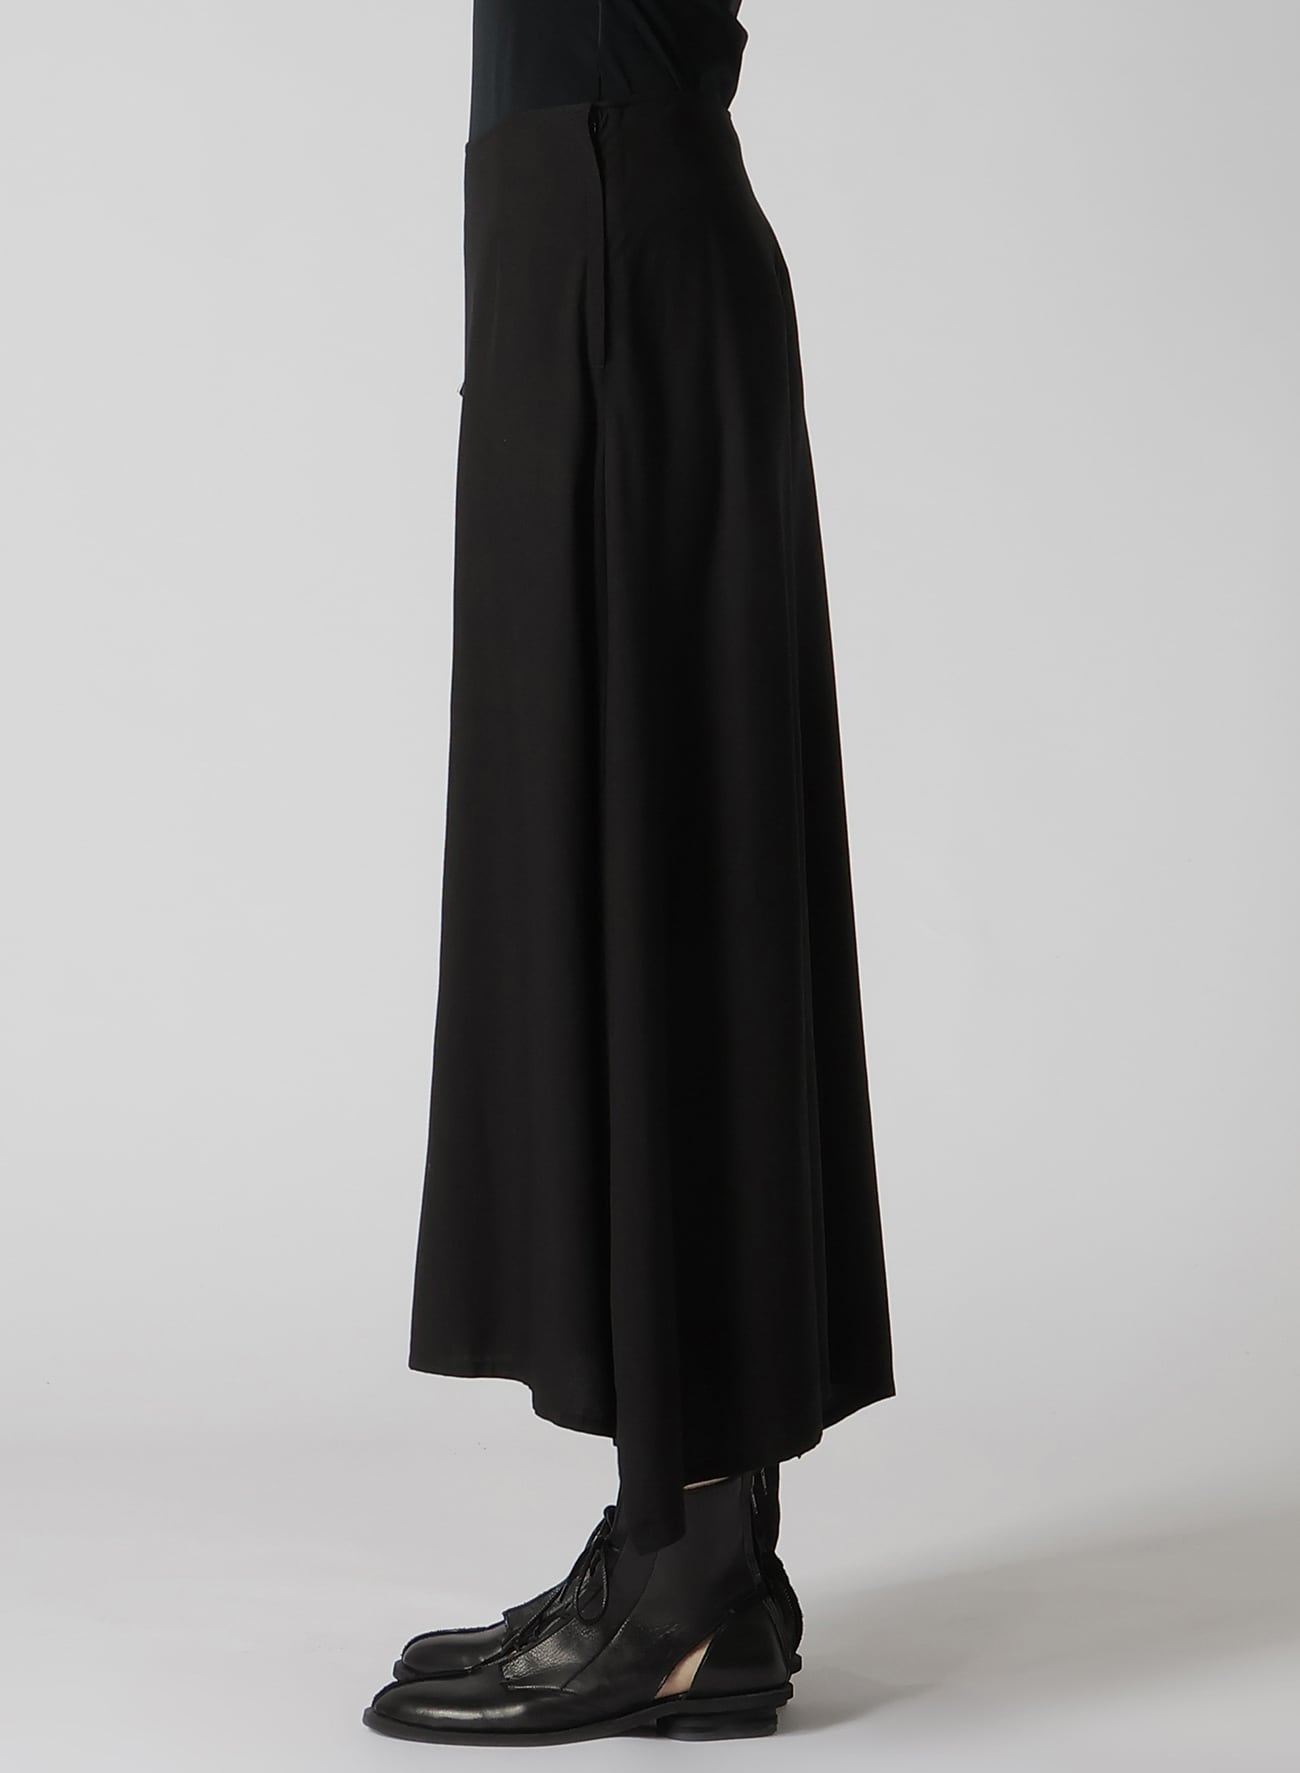 RAYON BROAD RIGHT CROPPED PANTS SKIRT(XS Black): Y's｜THE SHOP